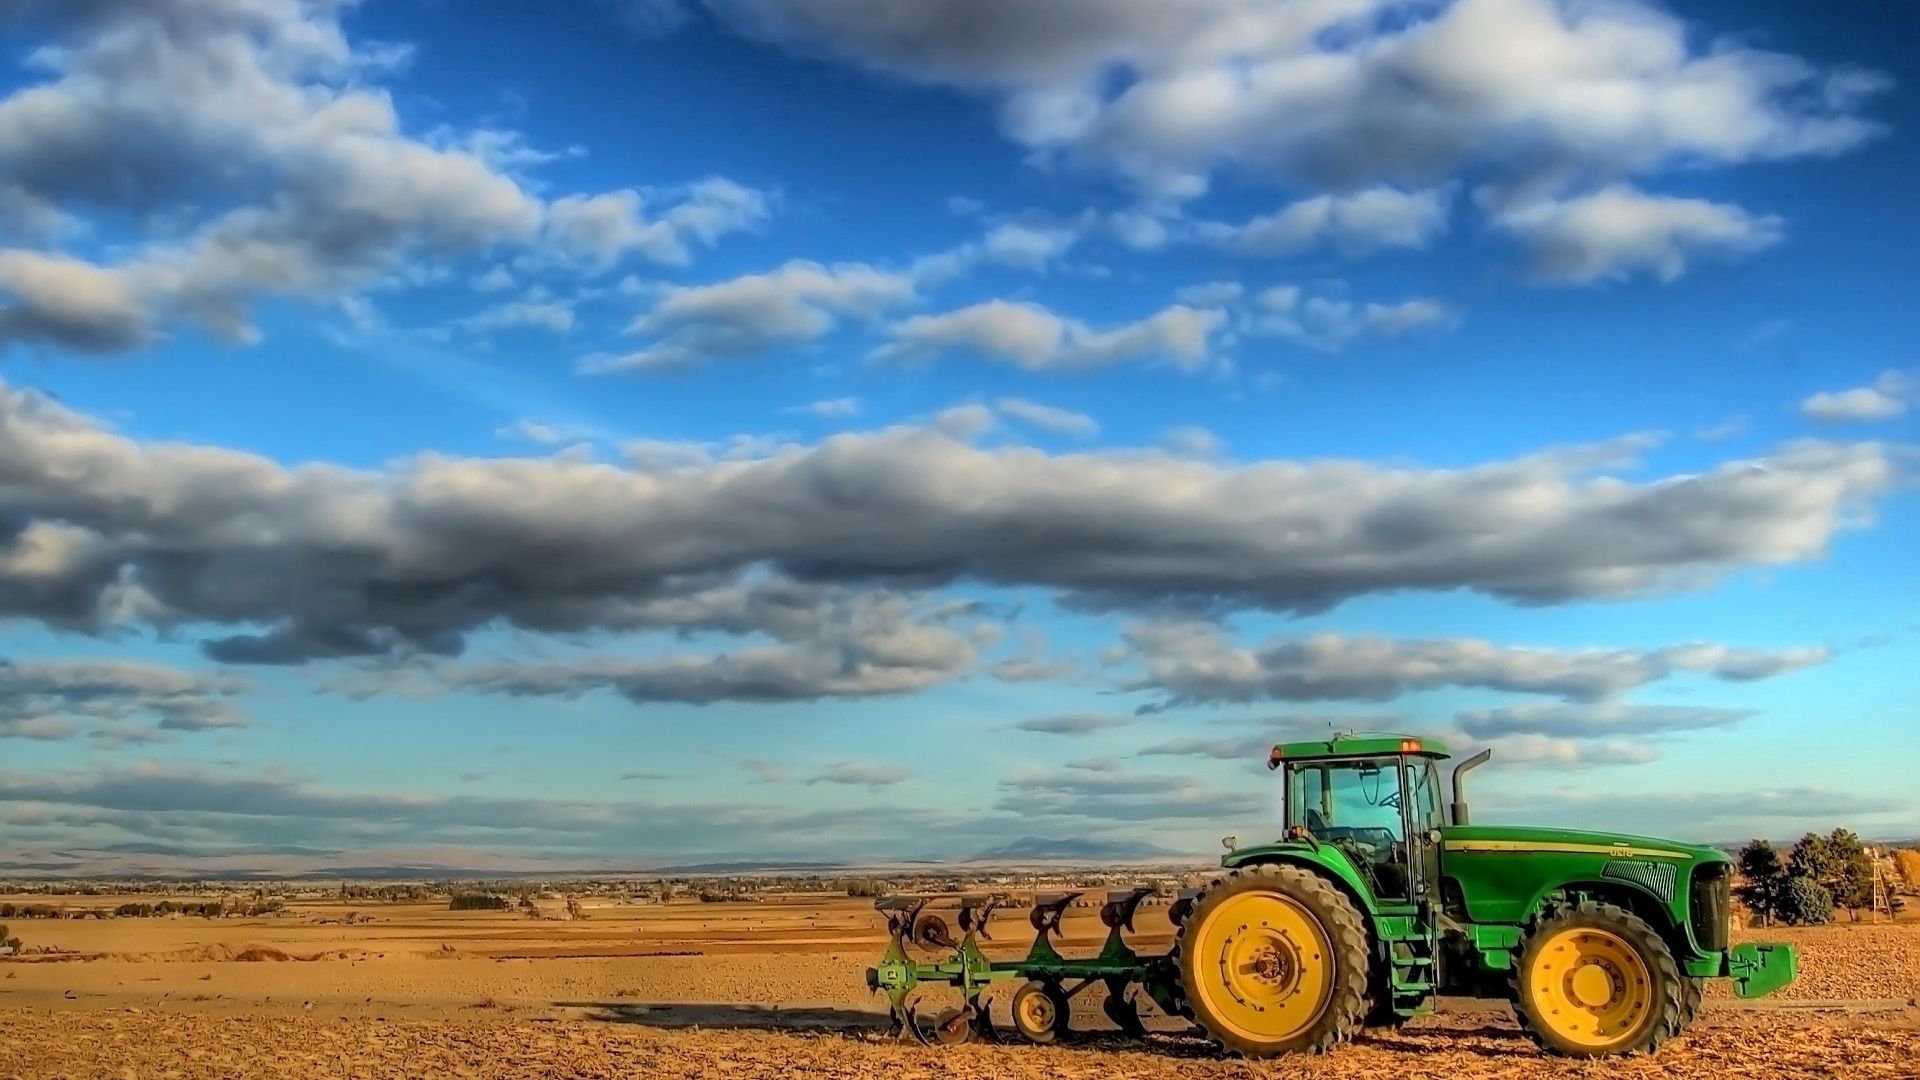 Download wallpaper 1920x1080 tractor, field, plowing, clouds, agriculture  full hd, hdtv, fhd, 1080p hd background